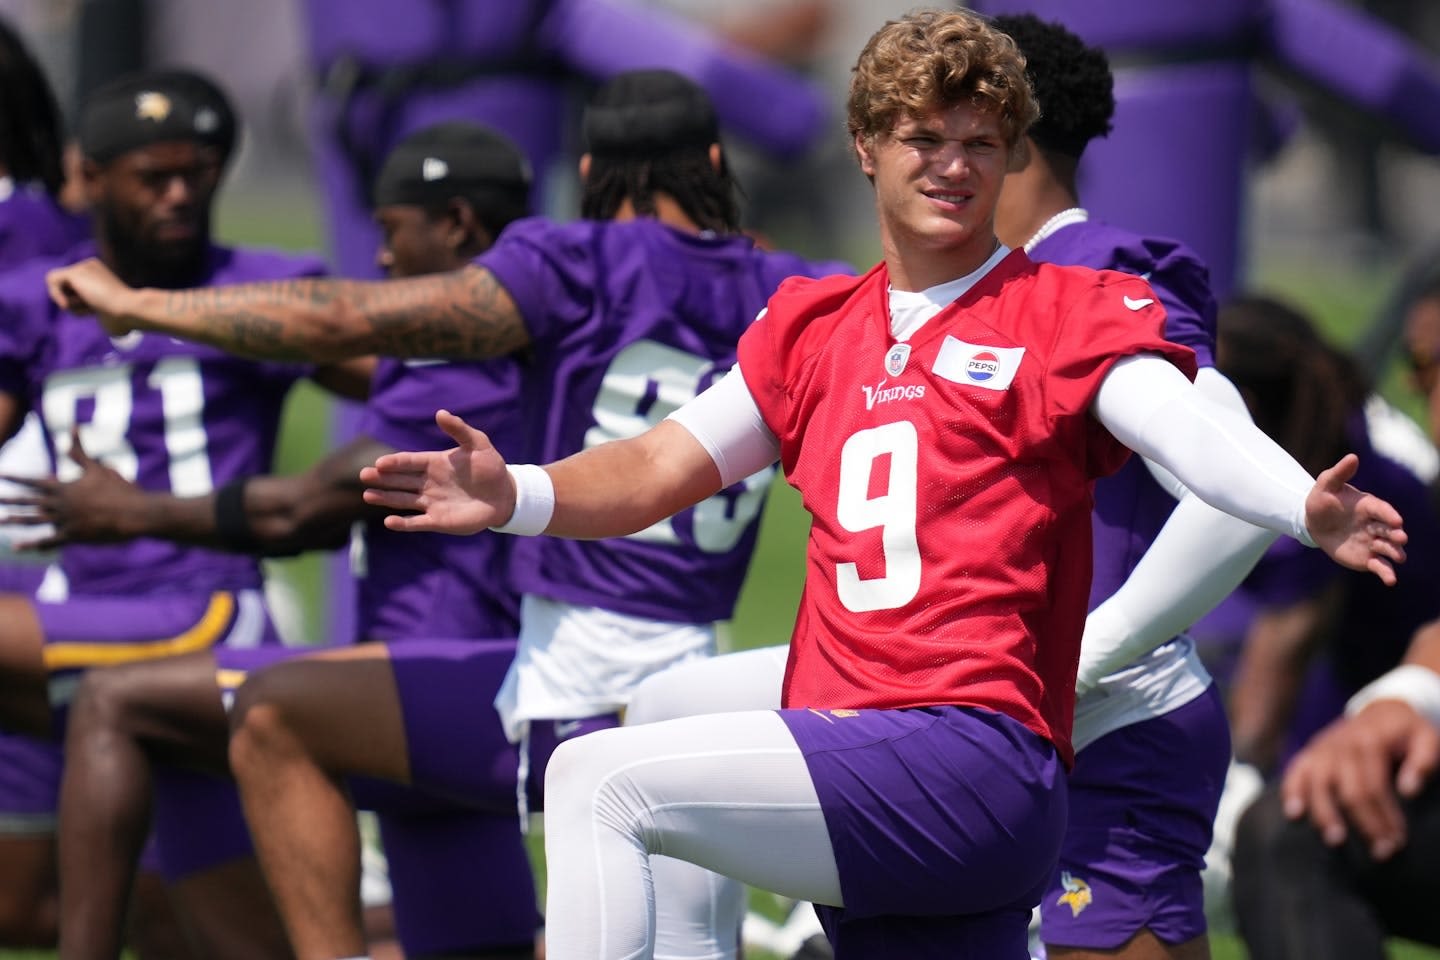 What to know before you go to Vikings training camp